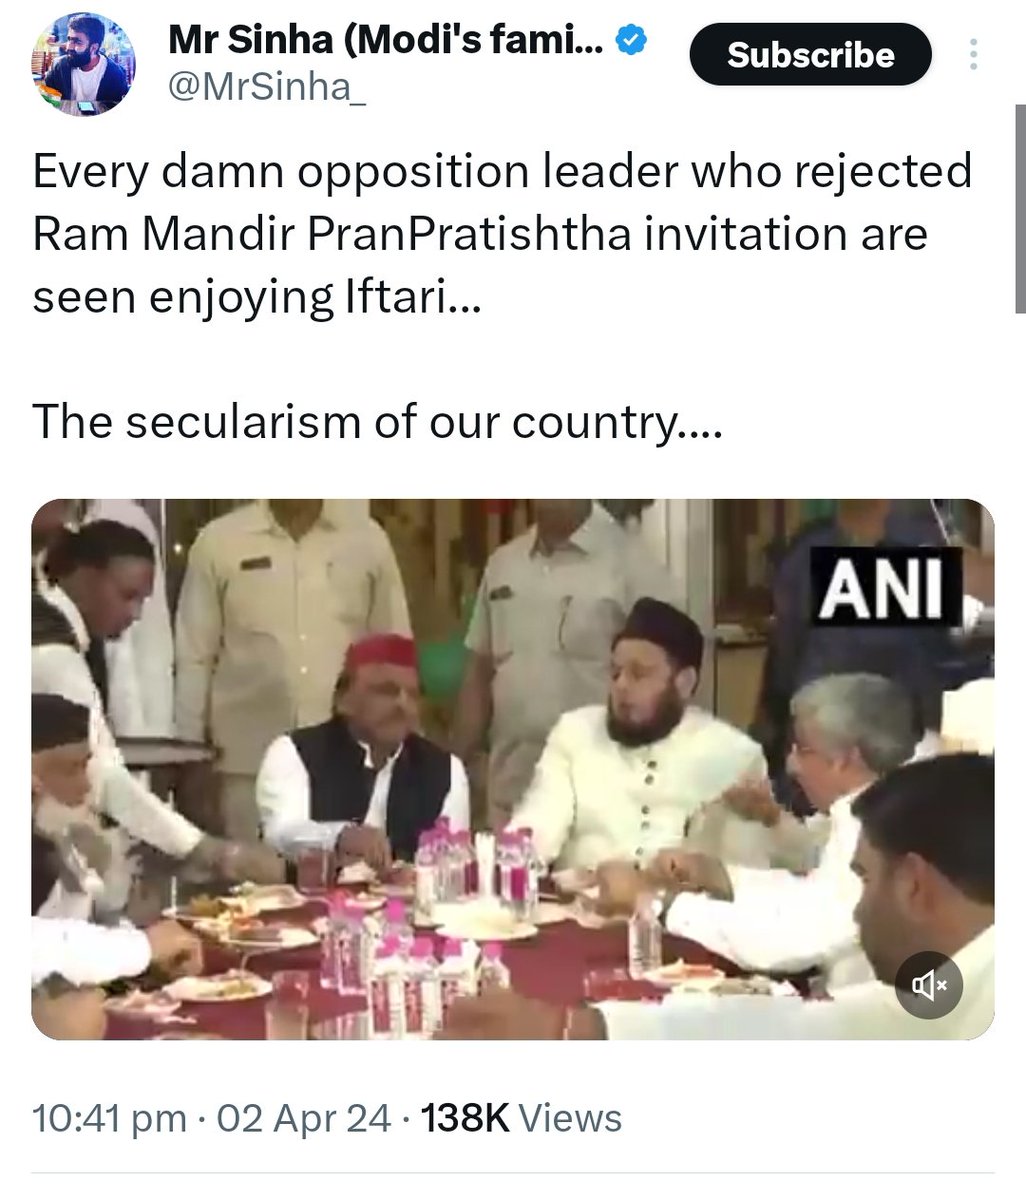 Why RSS leader Indresh Kumar Join Iftari, Go and ask, RSS doing it's ok, If opposition doing it's not Ok.